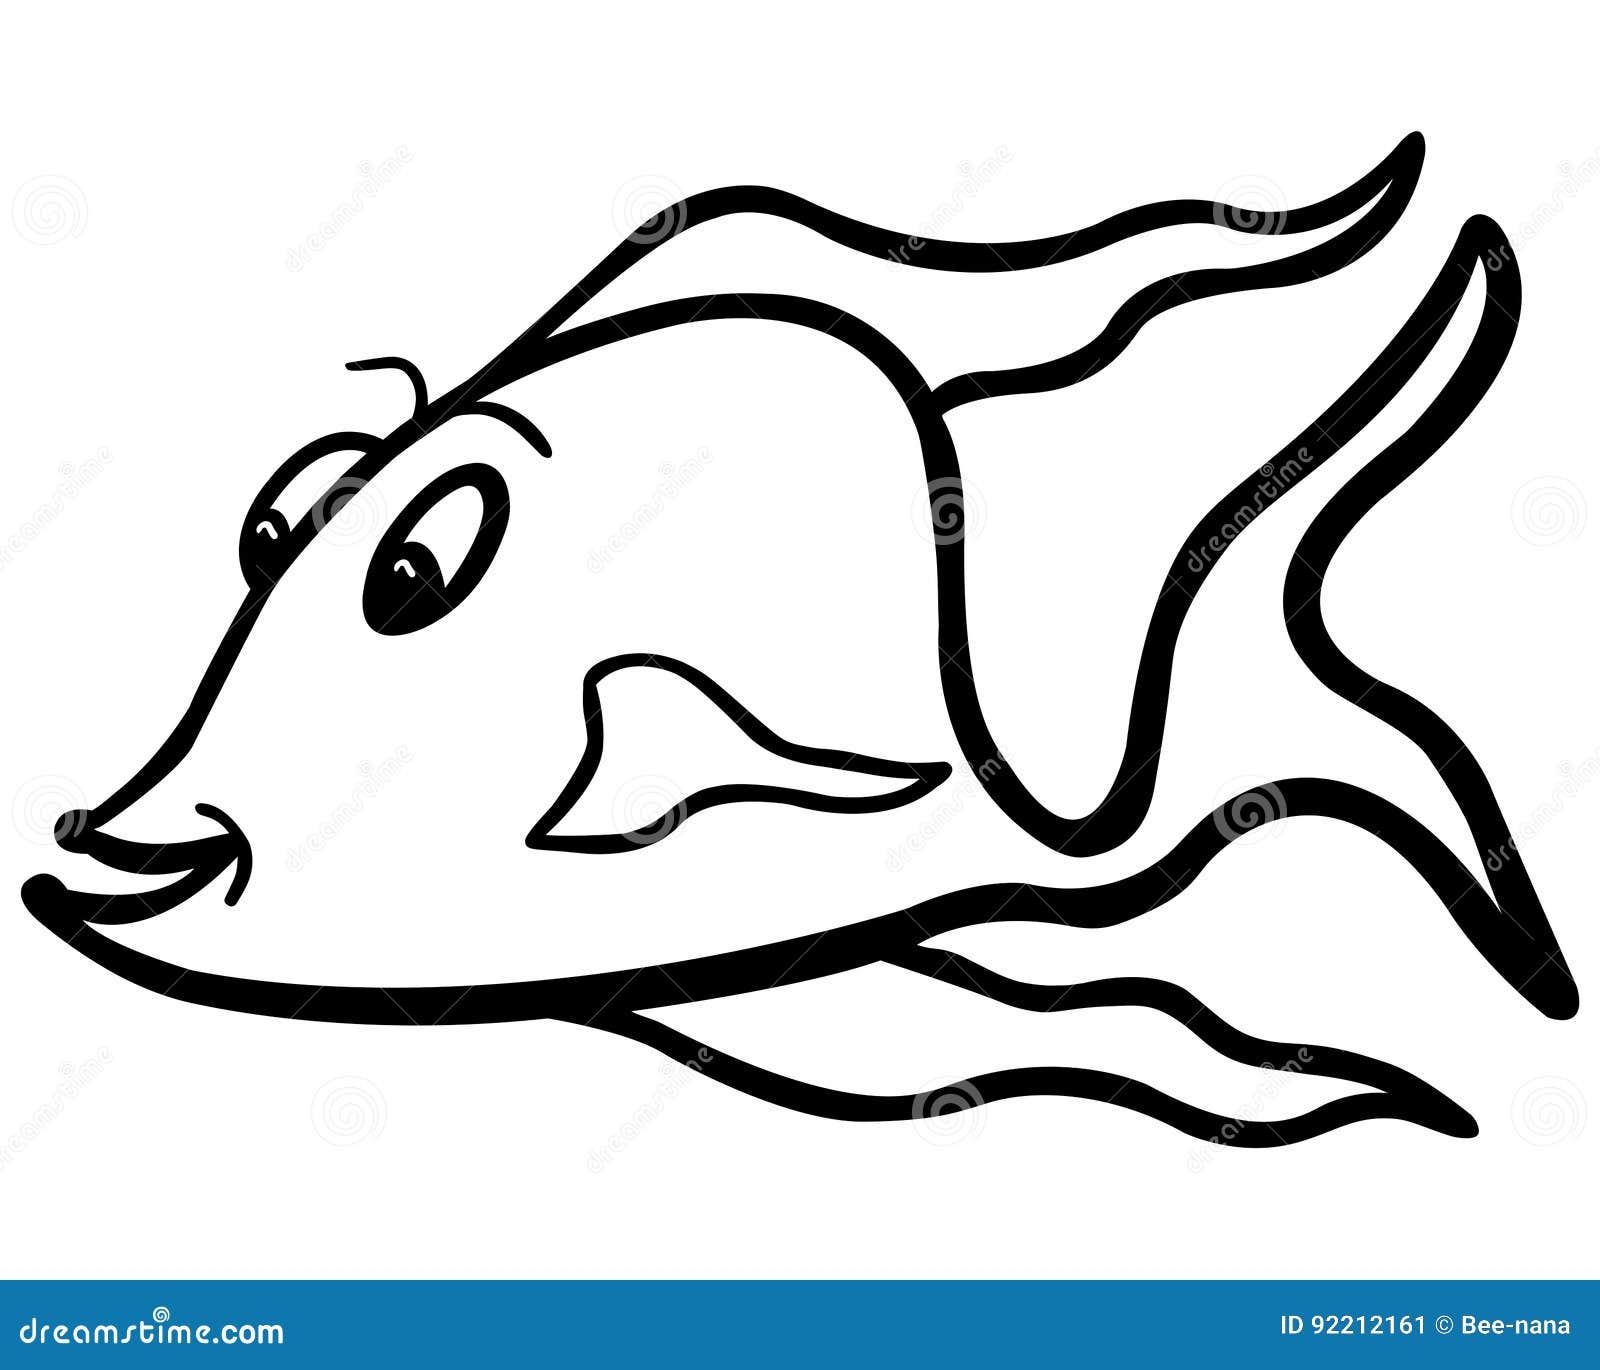 https://thumbs.dreamstime.com/z/cartoon-fish-clip-art-vector-illustration-hand-drawn-ready-all-your-projects-color-to-suit-your-needs-use-92212161.jpg